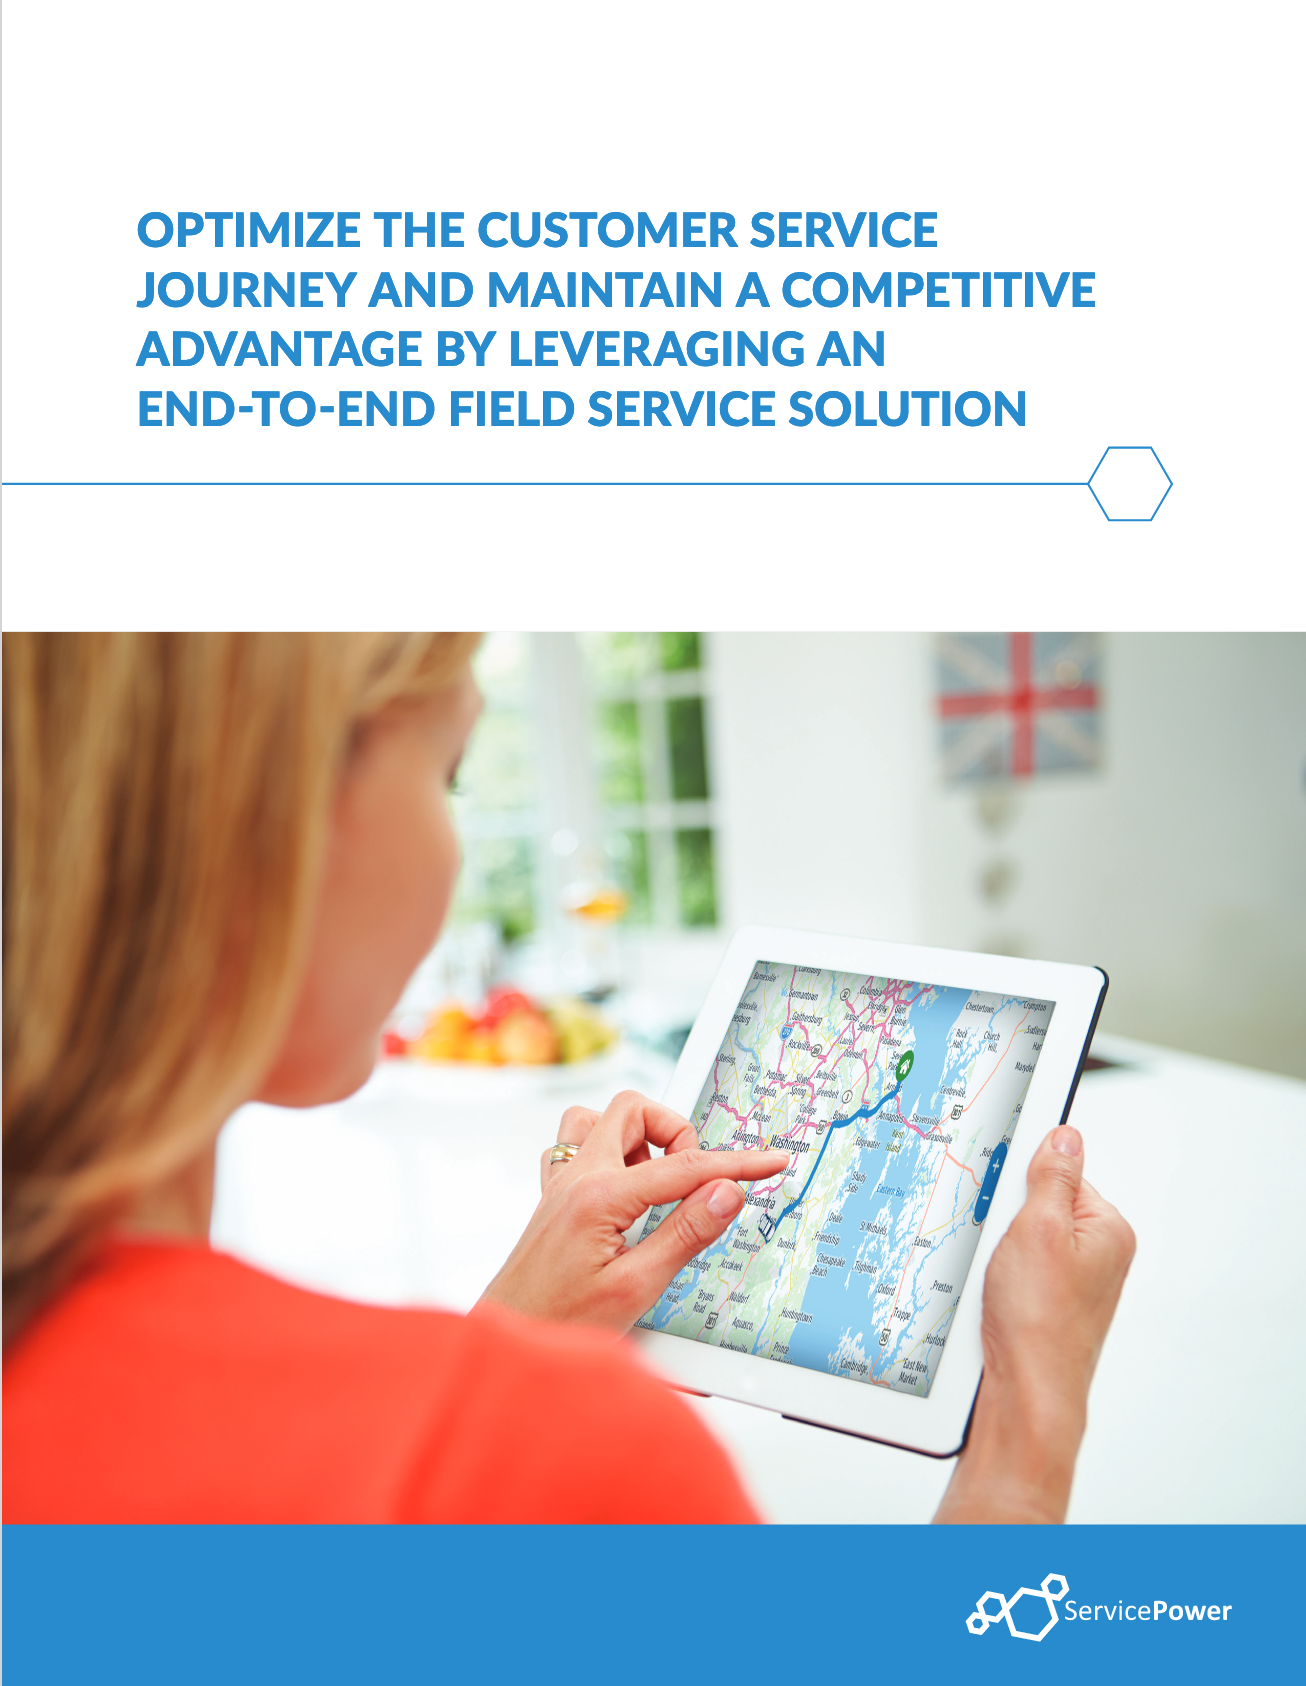 Retail Companies: Maintain a Competitive Advantage by Leveraging a Field Service Solution 